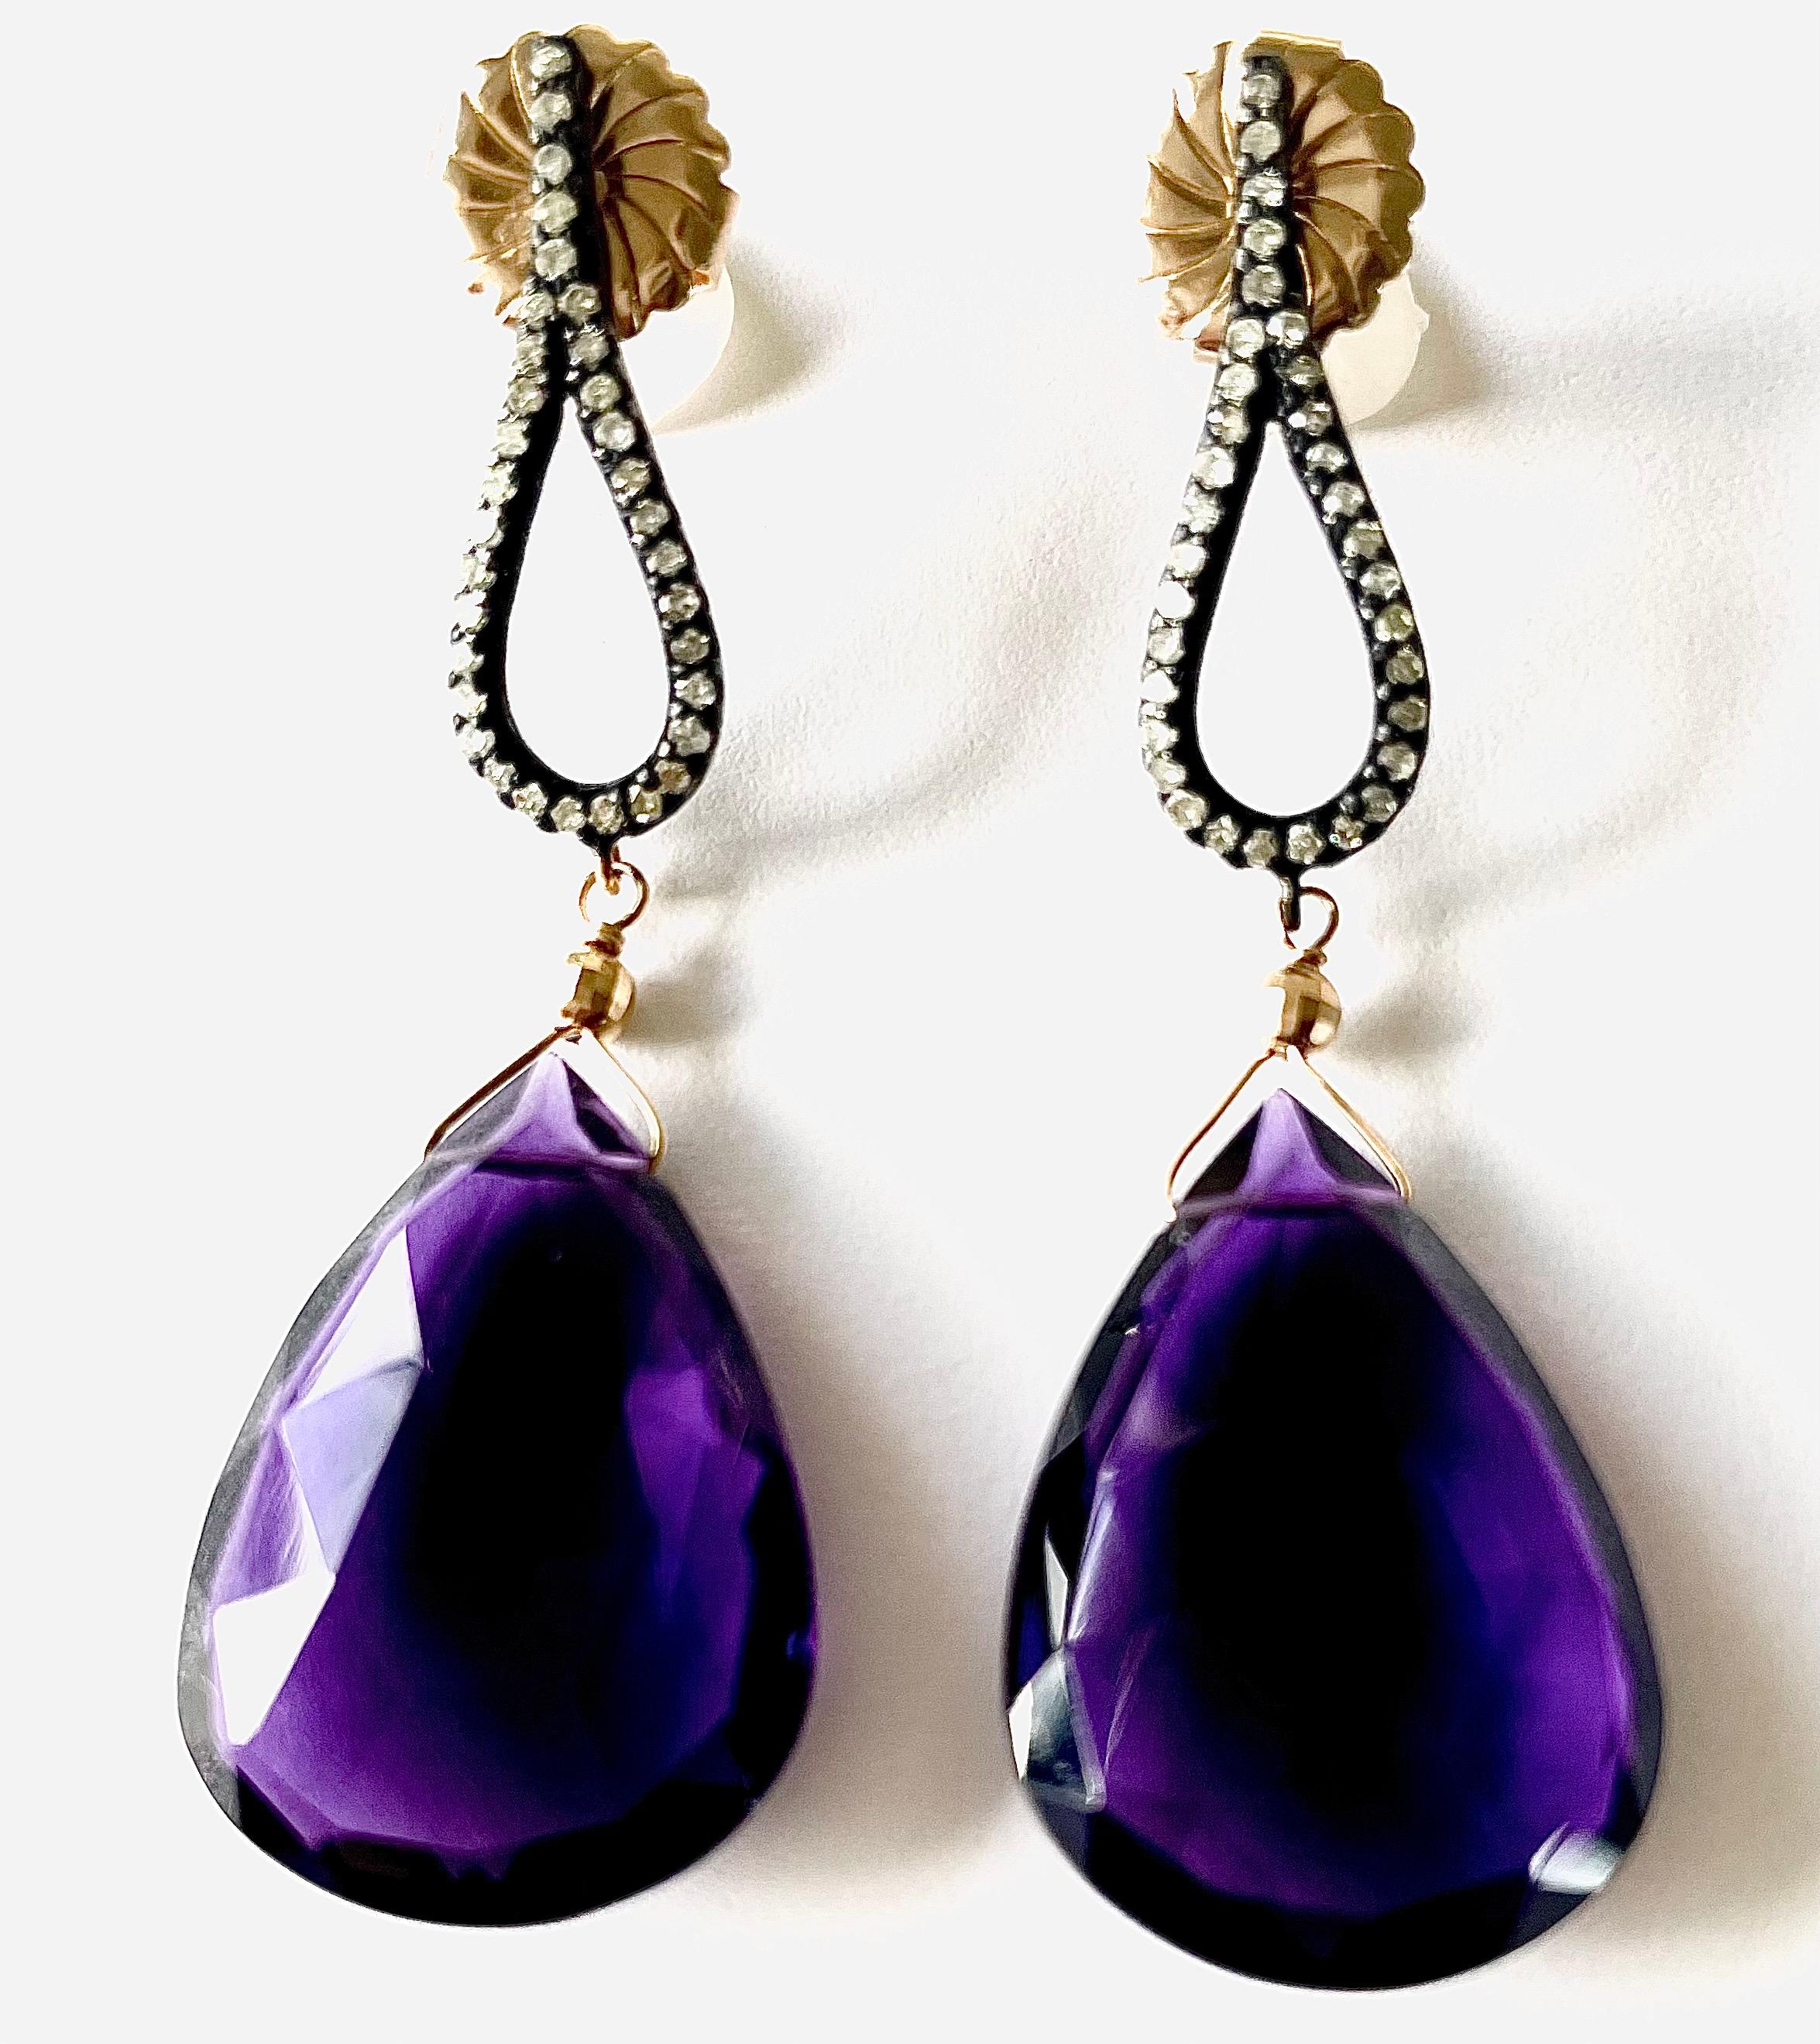 Description
Large Amethyst faceted drops 44ct, Pave diamond Black Rhodium sterling silver earrings, contrasted with yellow gold.
Item # E3067

Materials and Weight
Amethyst, 26 x 28 mm, 44 carats, drop shape.
Pave diamonds.
Posts and jumbo backs,